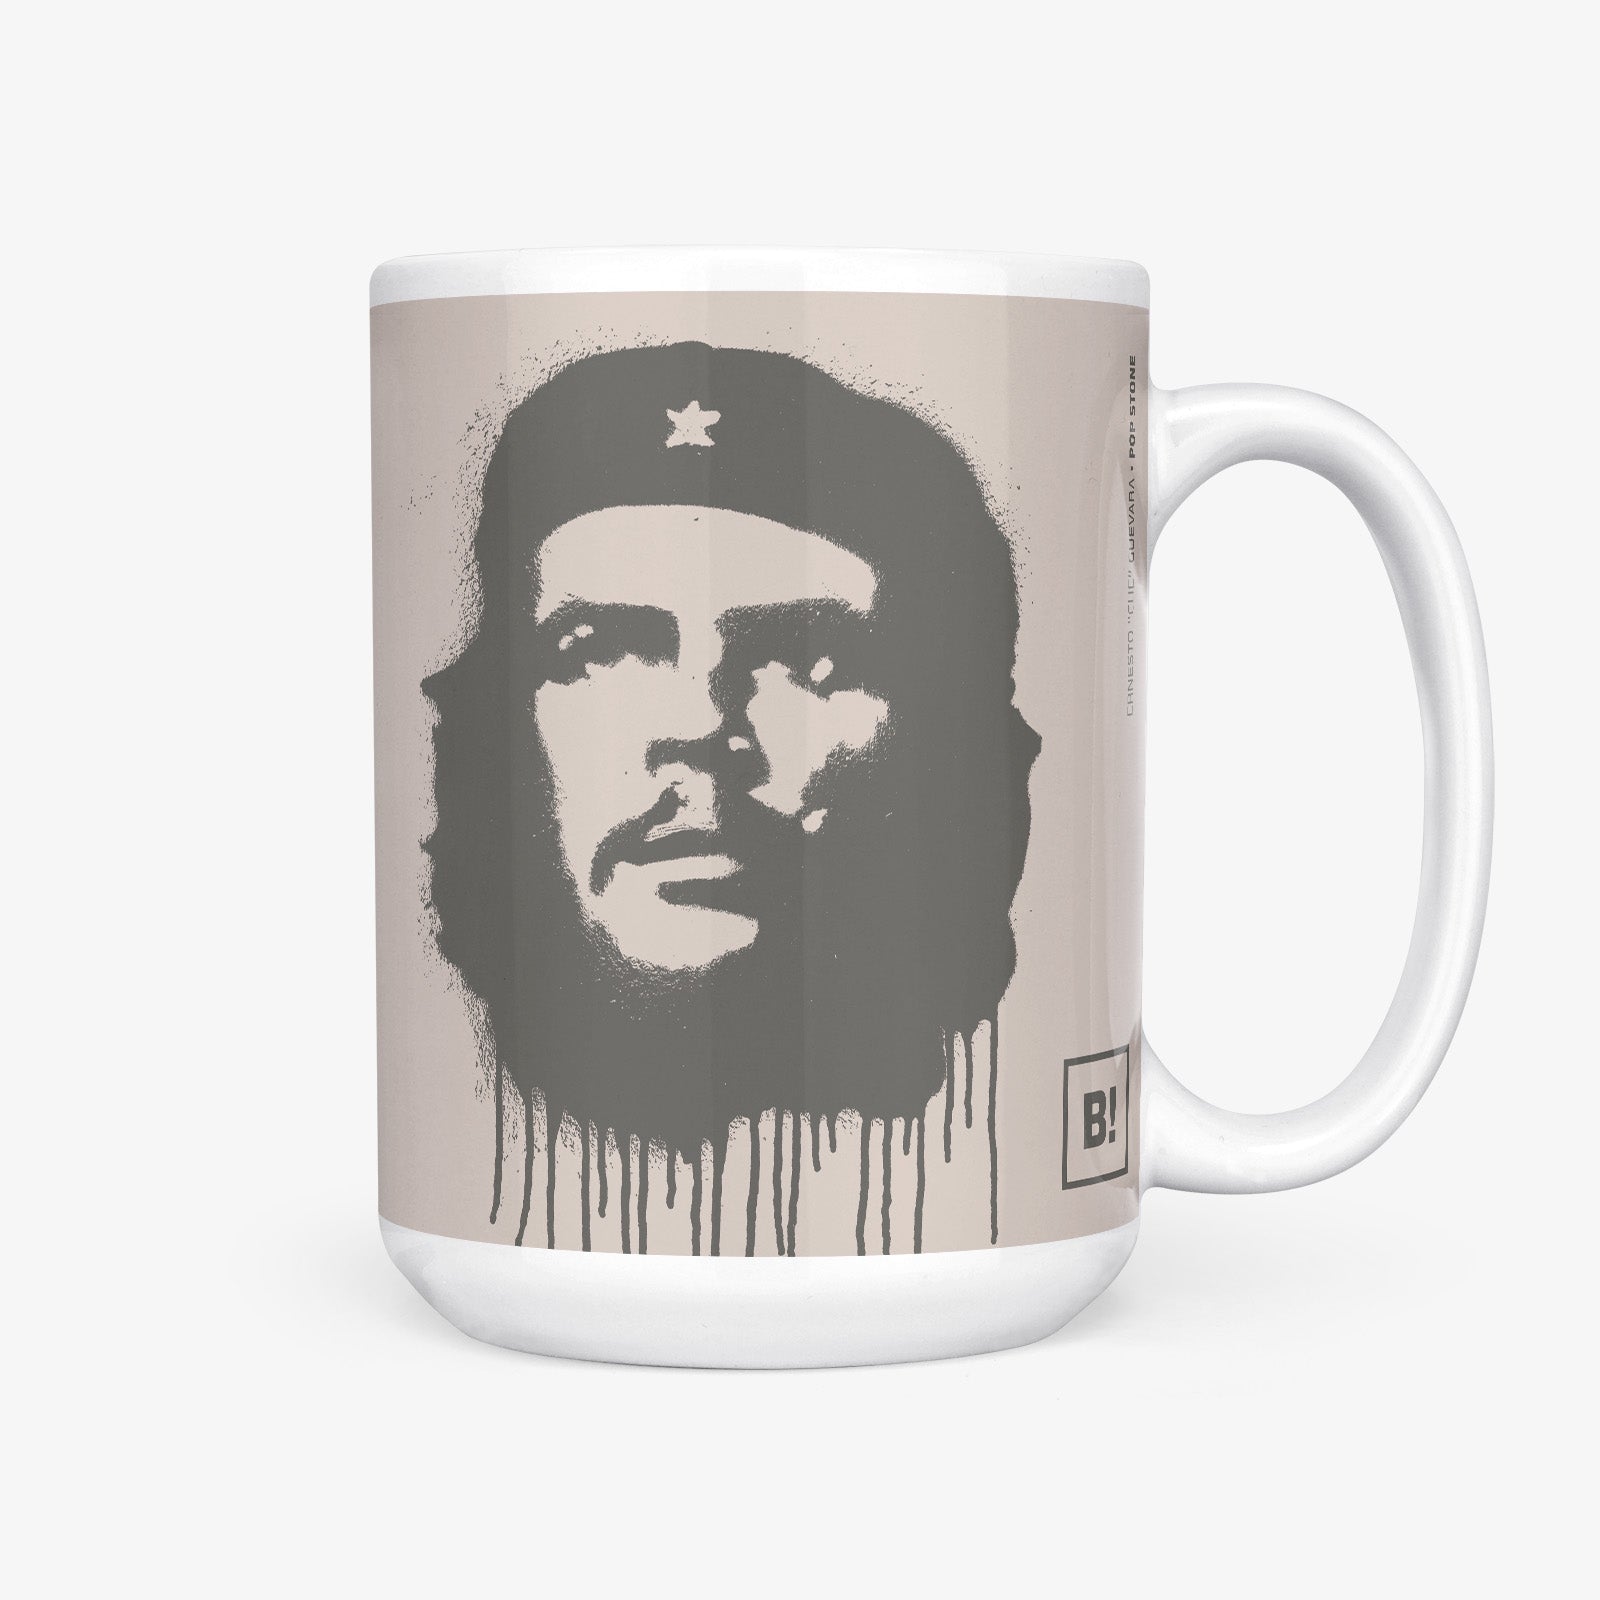 Be inspired by our "Ernesto Che Guevara" Pop Stone Coffee Mug. Featuring a 15oz size with the handle on the right.